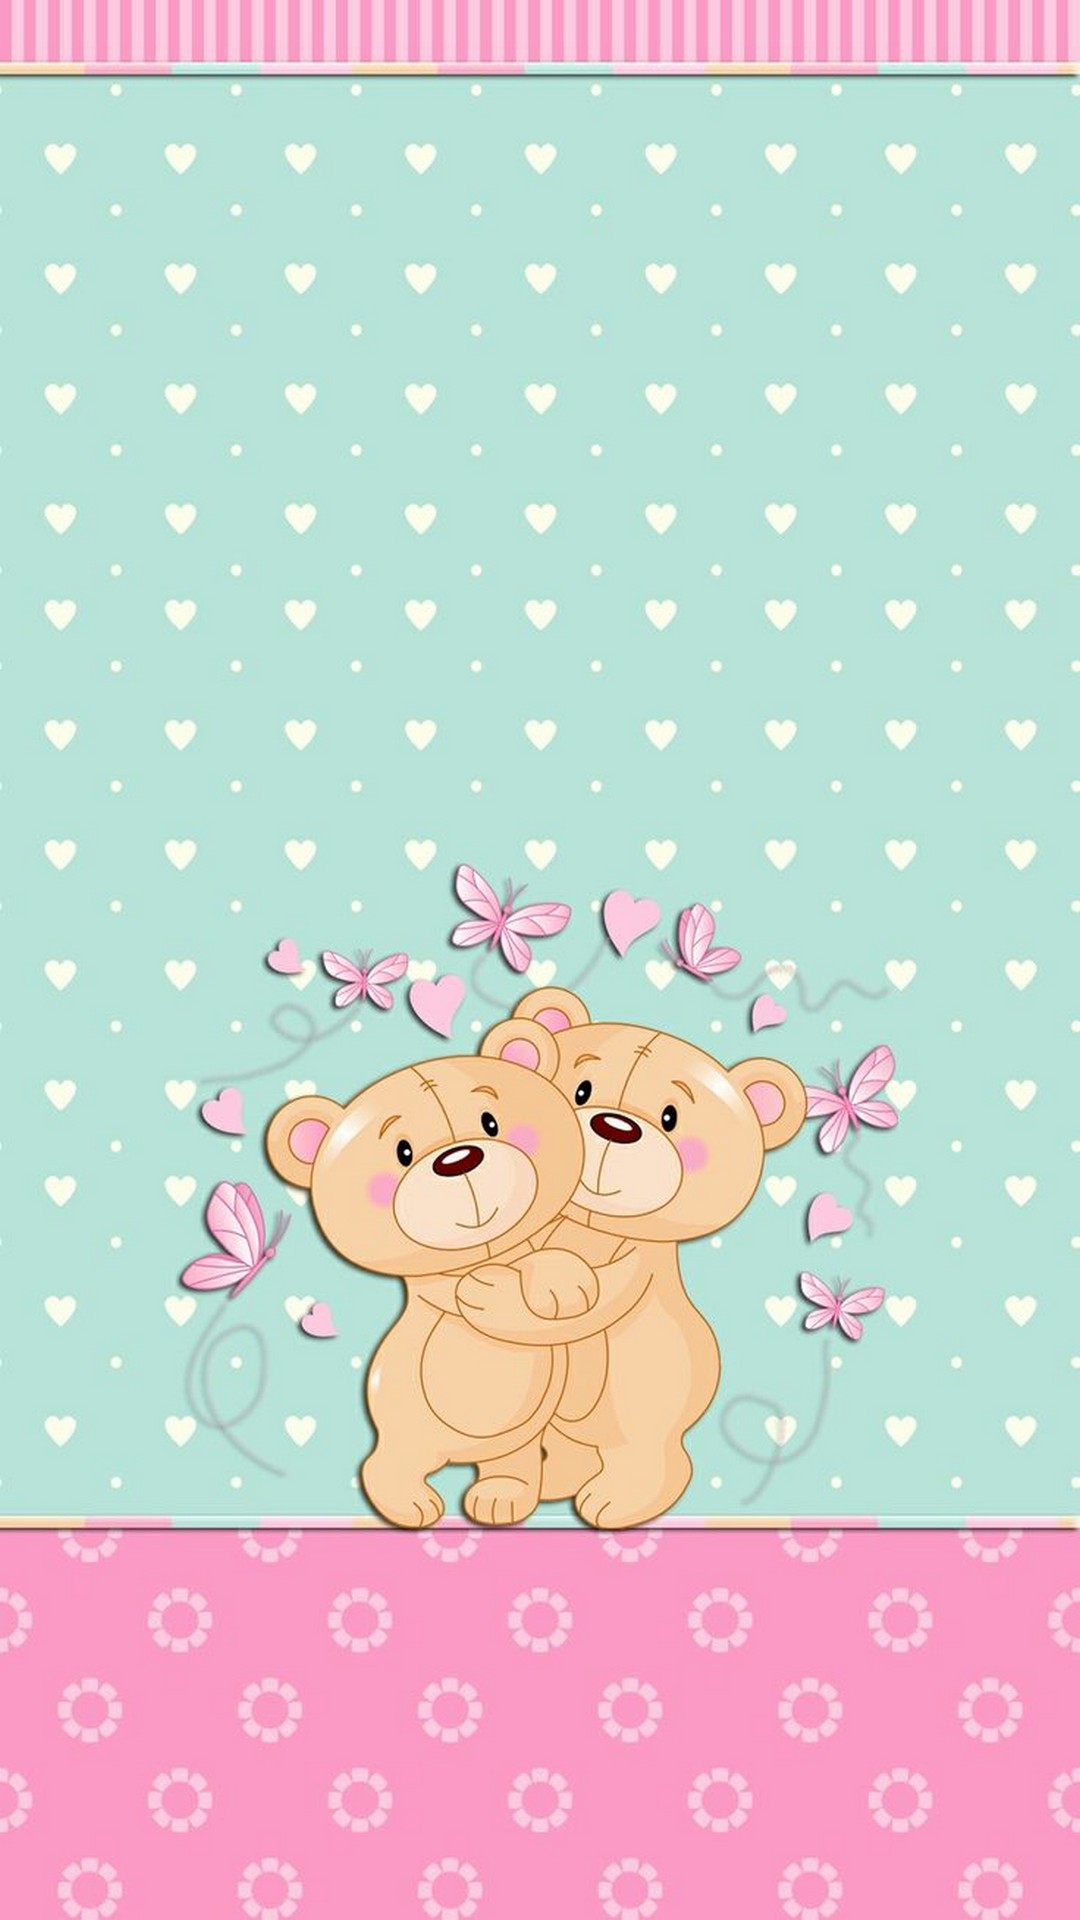 Valentines Day Cards Wallpaper Android with HD resolution 1080x1920